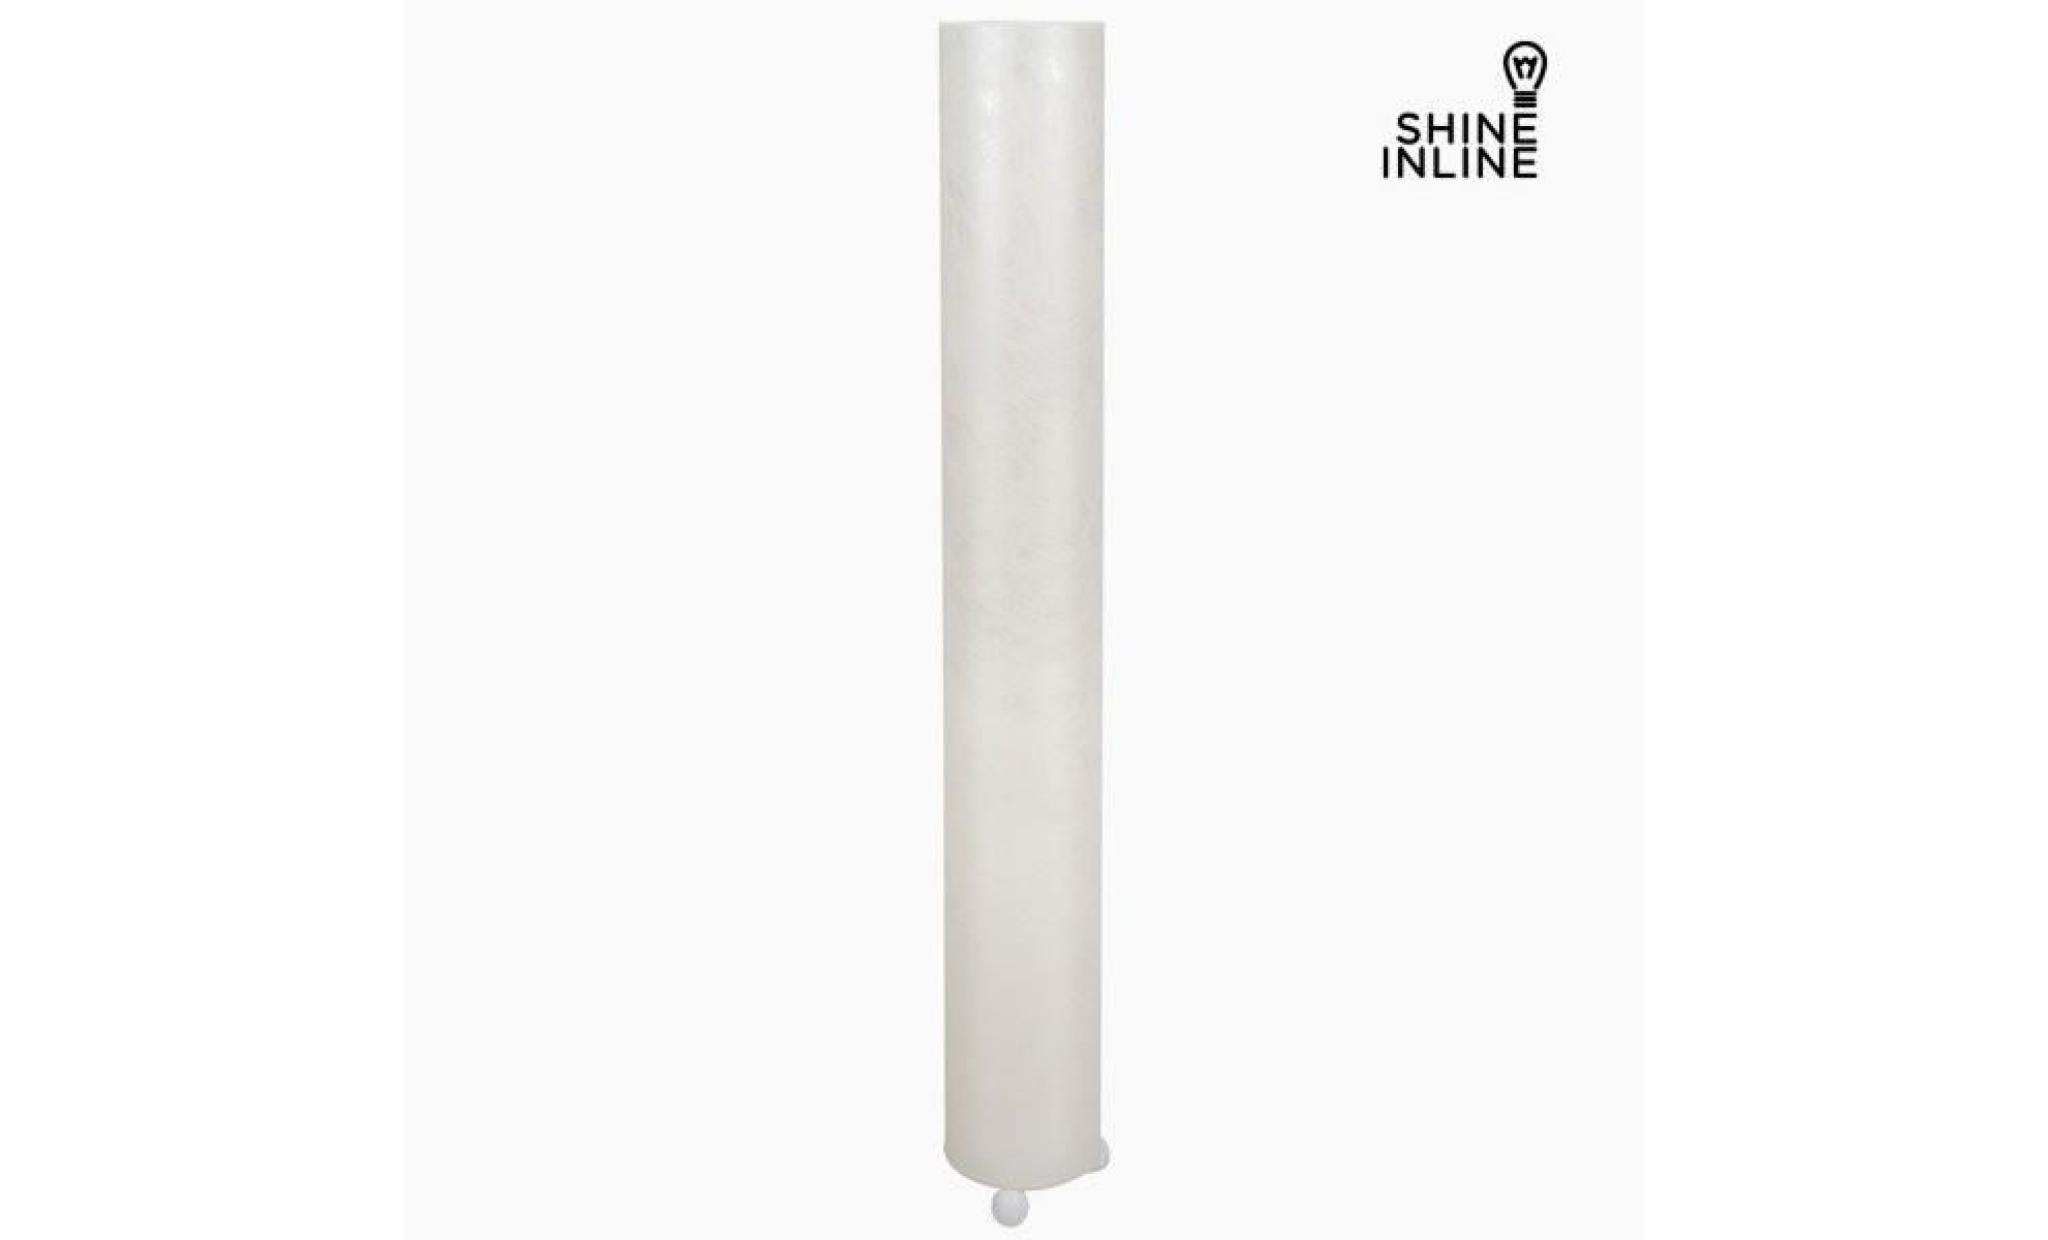 lampadaire tropic by shine inline